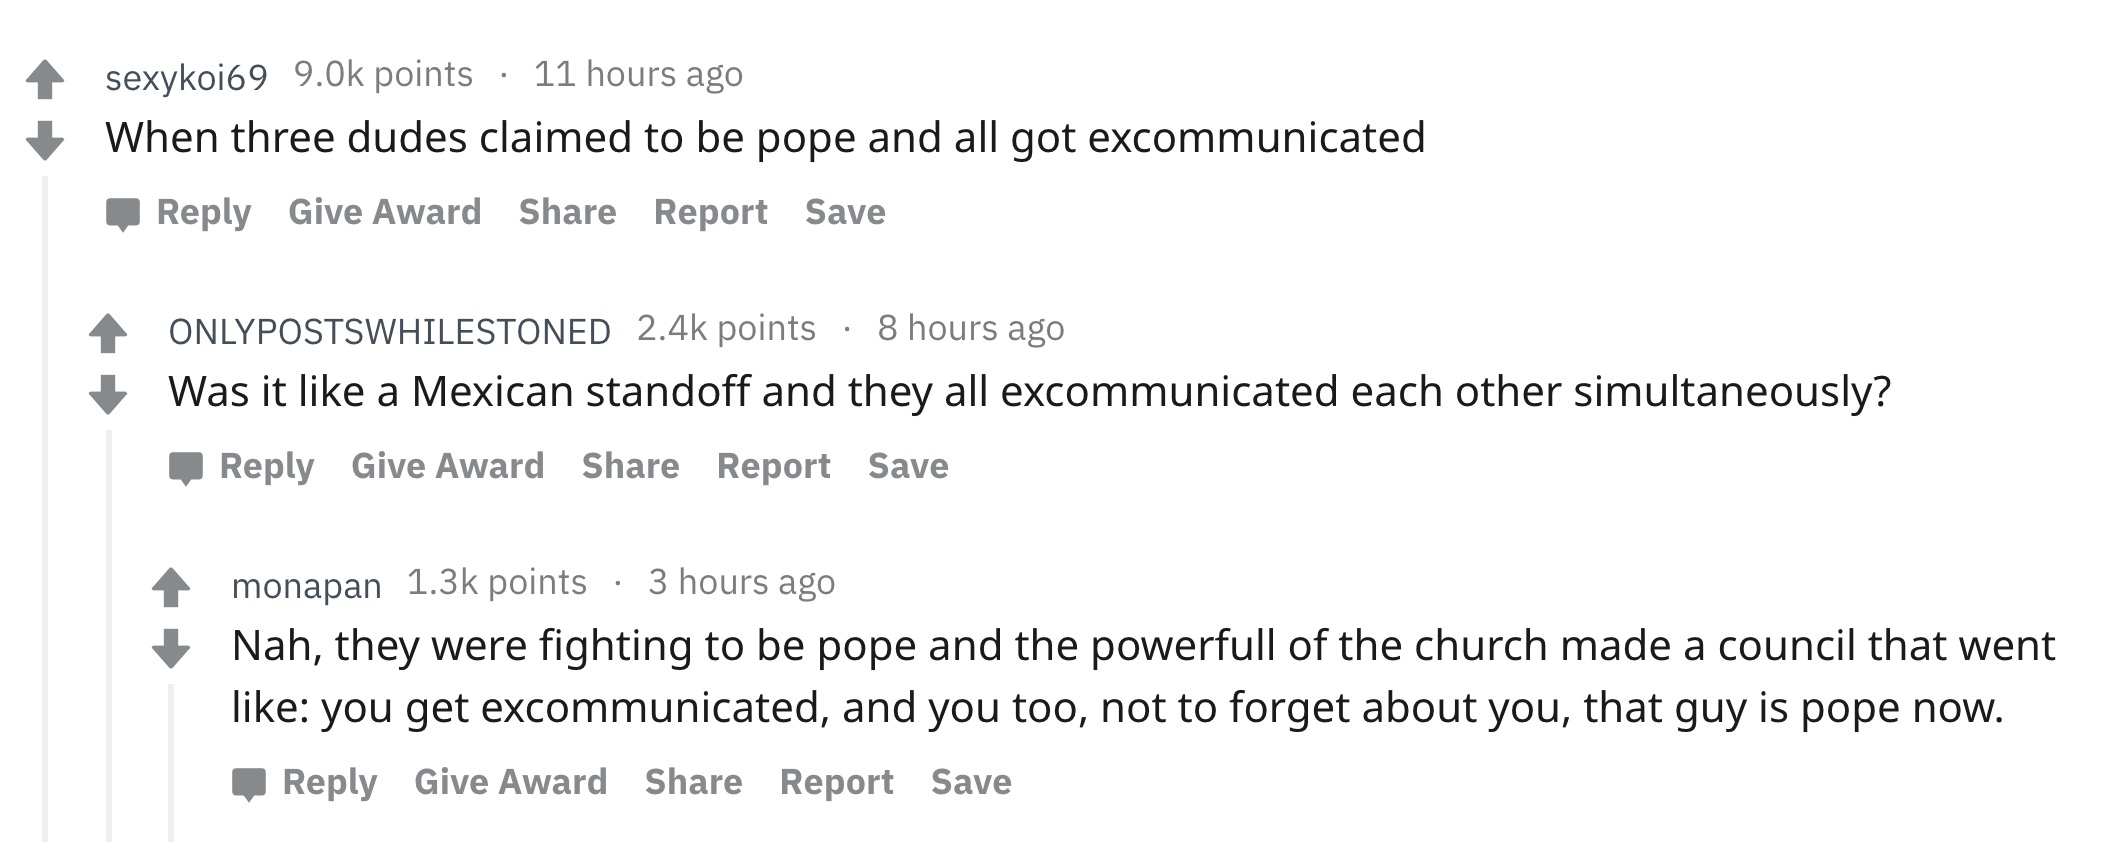 angle - sexykoi69 9.Ok points 11 hours ago When three dudes claimed to be pope and all got excommunicated Give Award Report Save Onlypostswhilestoned points 8 hours ago Was it a Mexican standoff and they all excommunicated each other simultaneously? Give